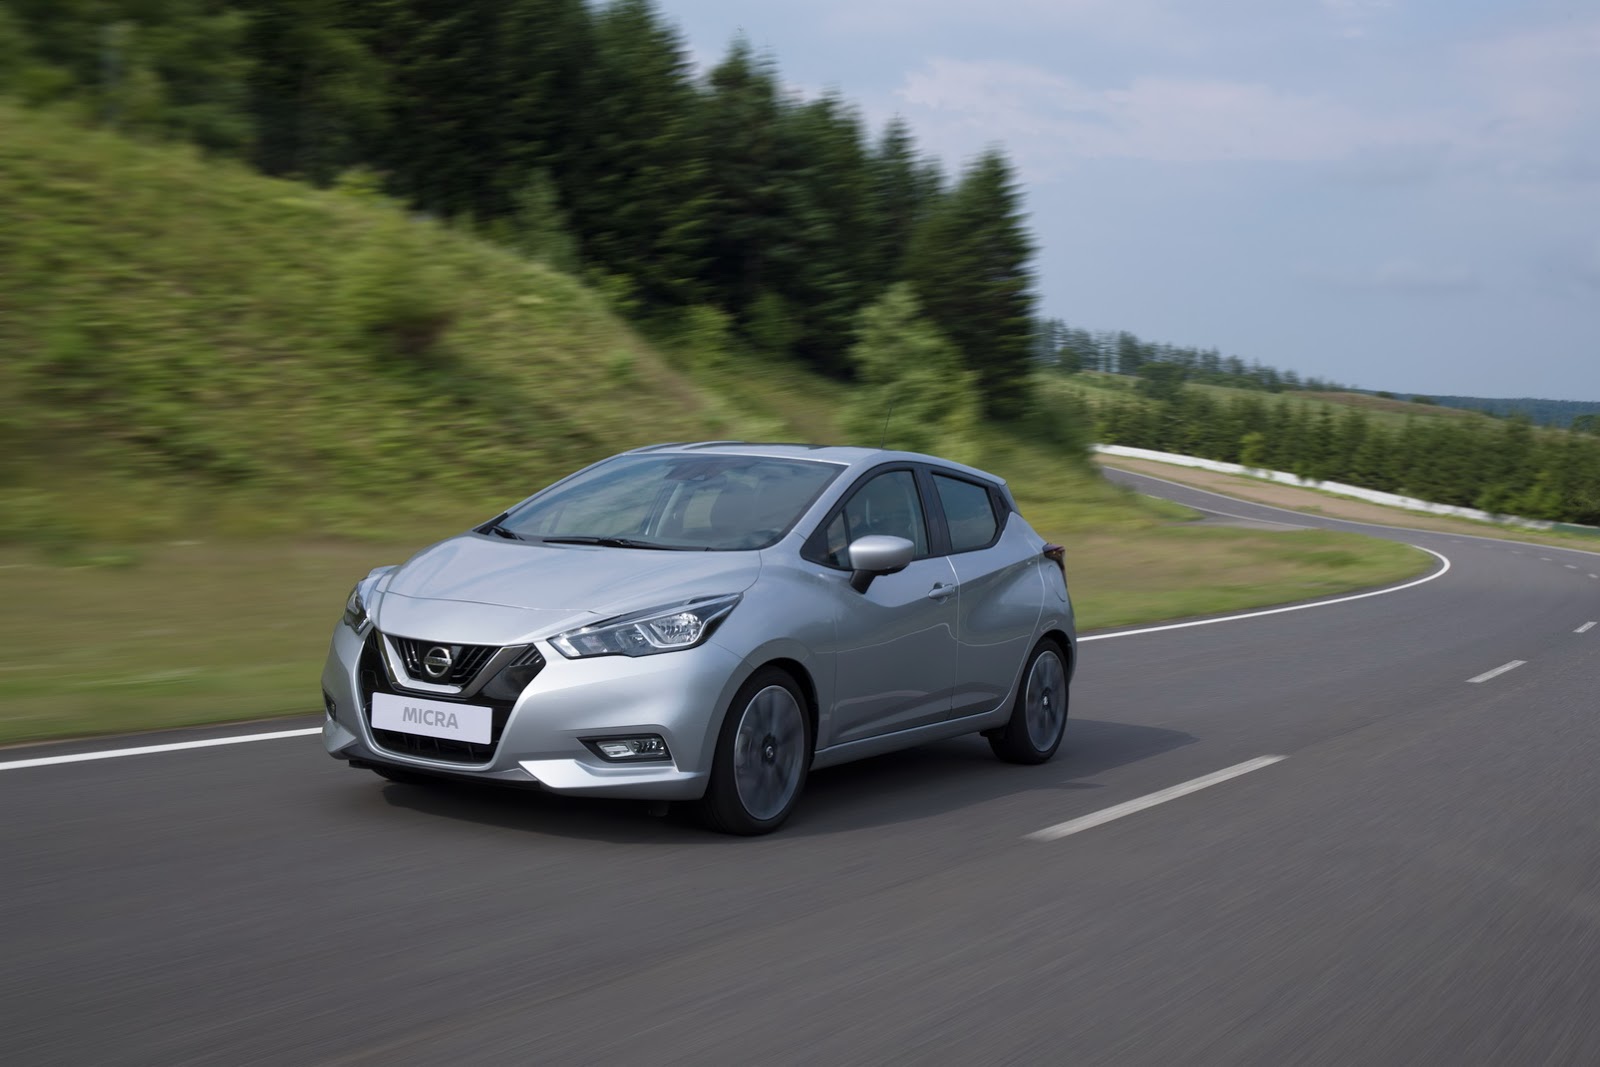 Is The 2017 Nissan Micra Finally A Match For Its Rivals?